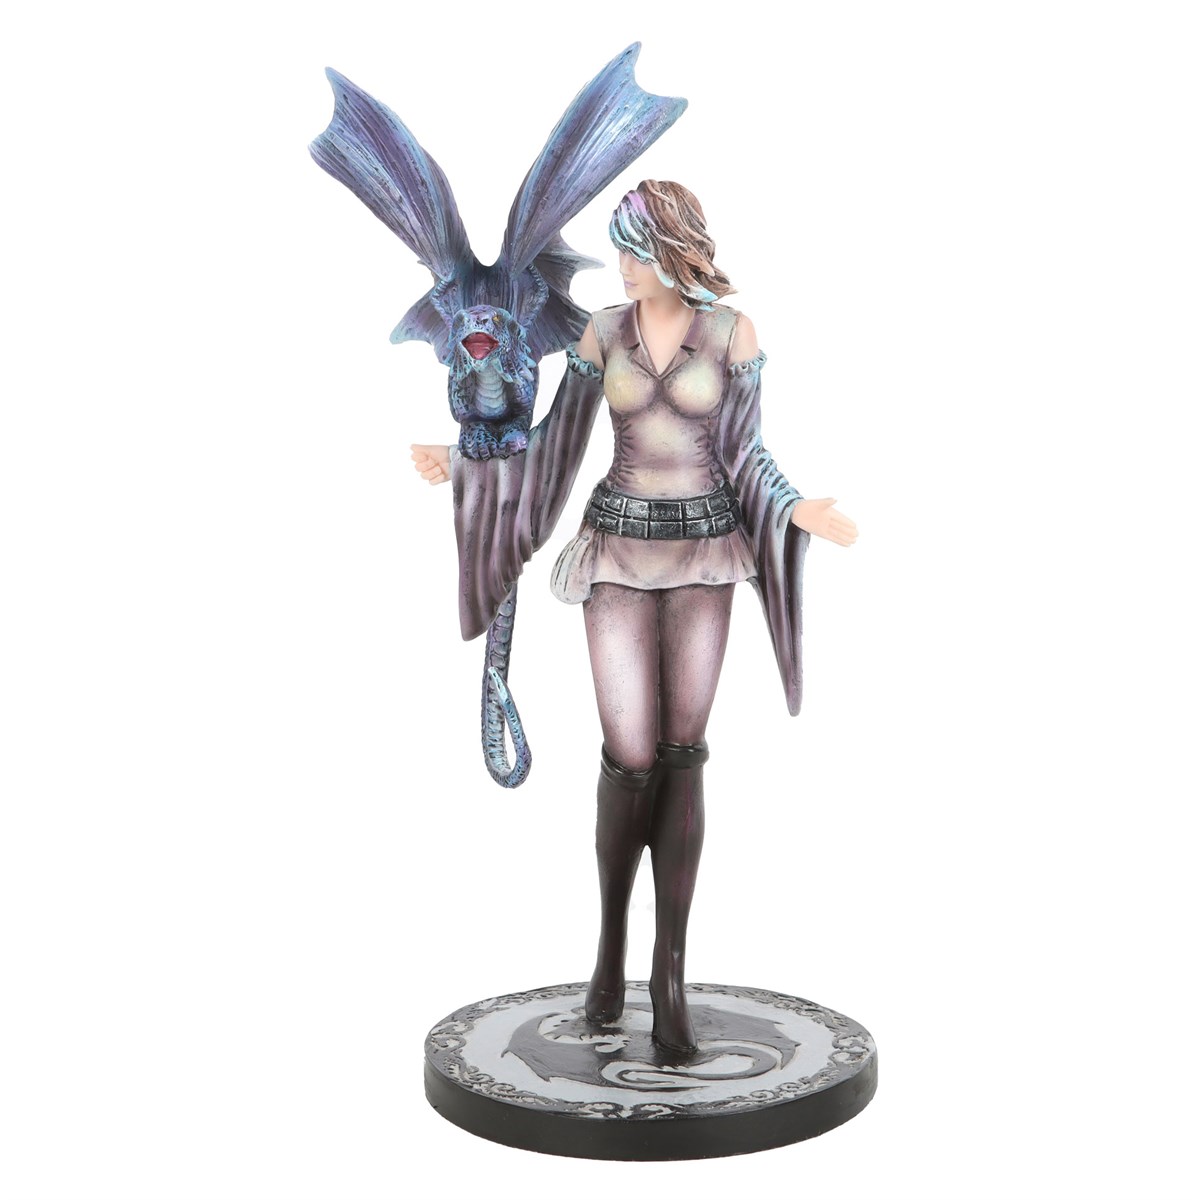 Dragon Trainer Figurine by Anne Stokes - Something Different Wholesale